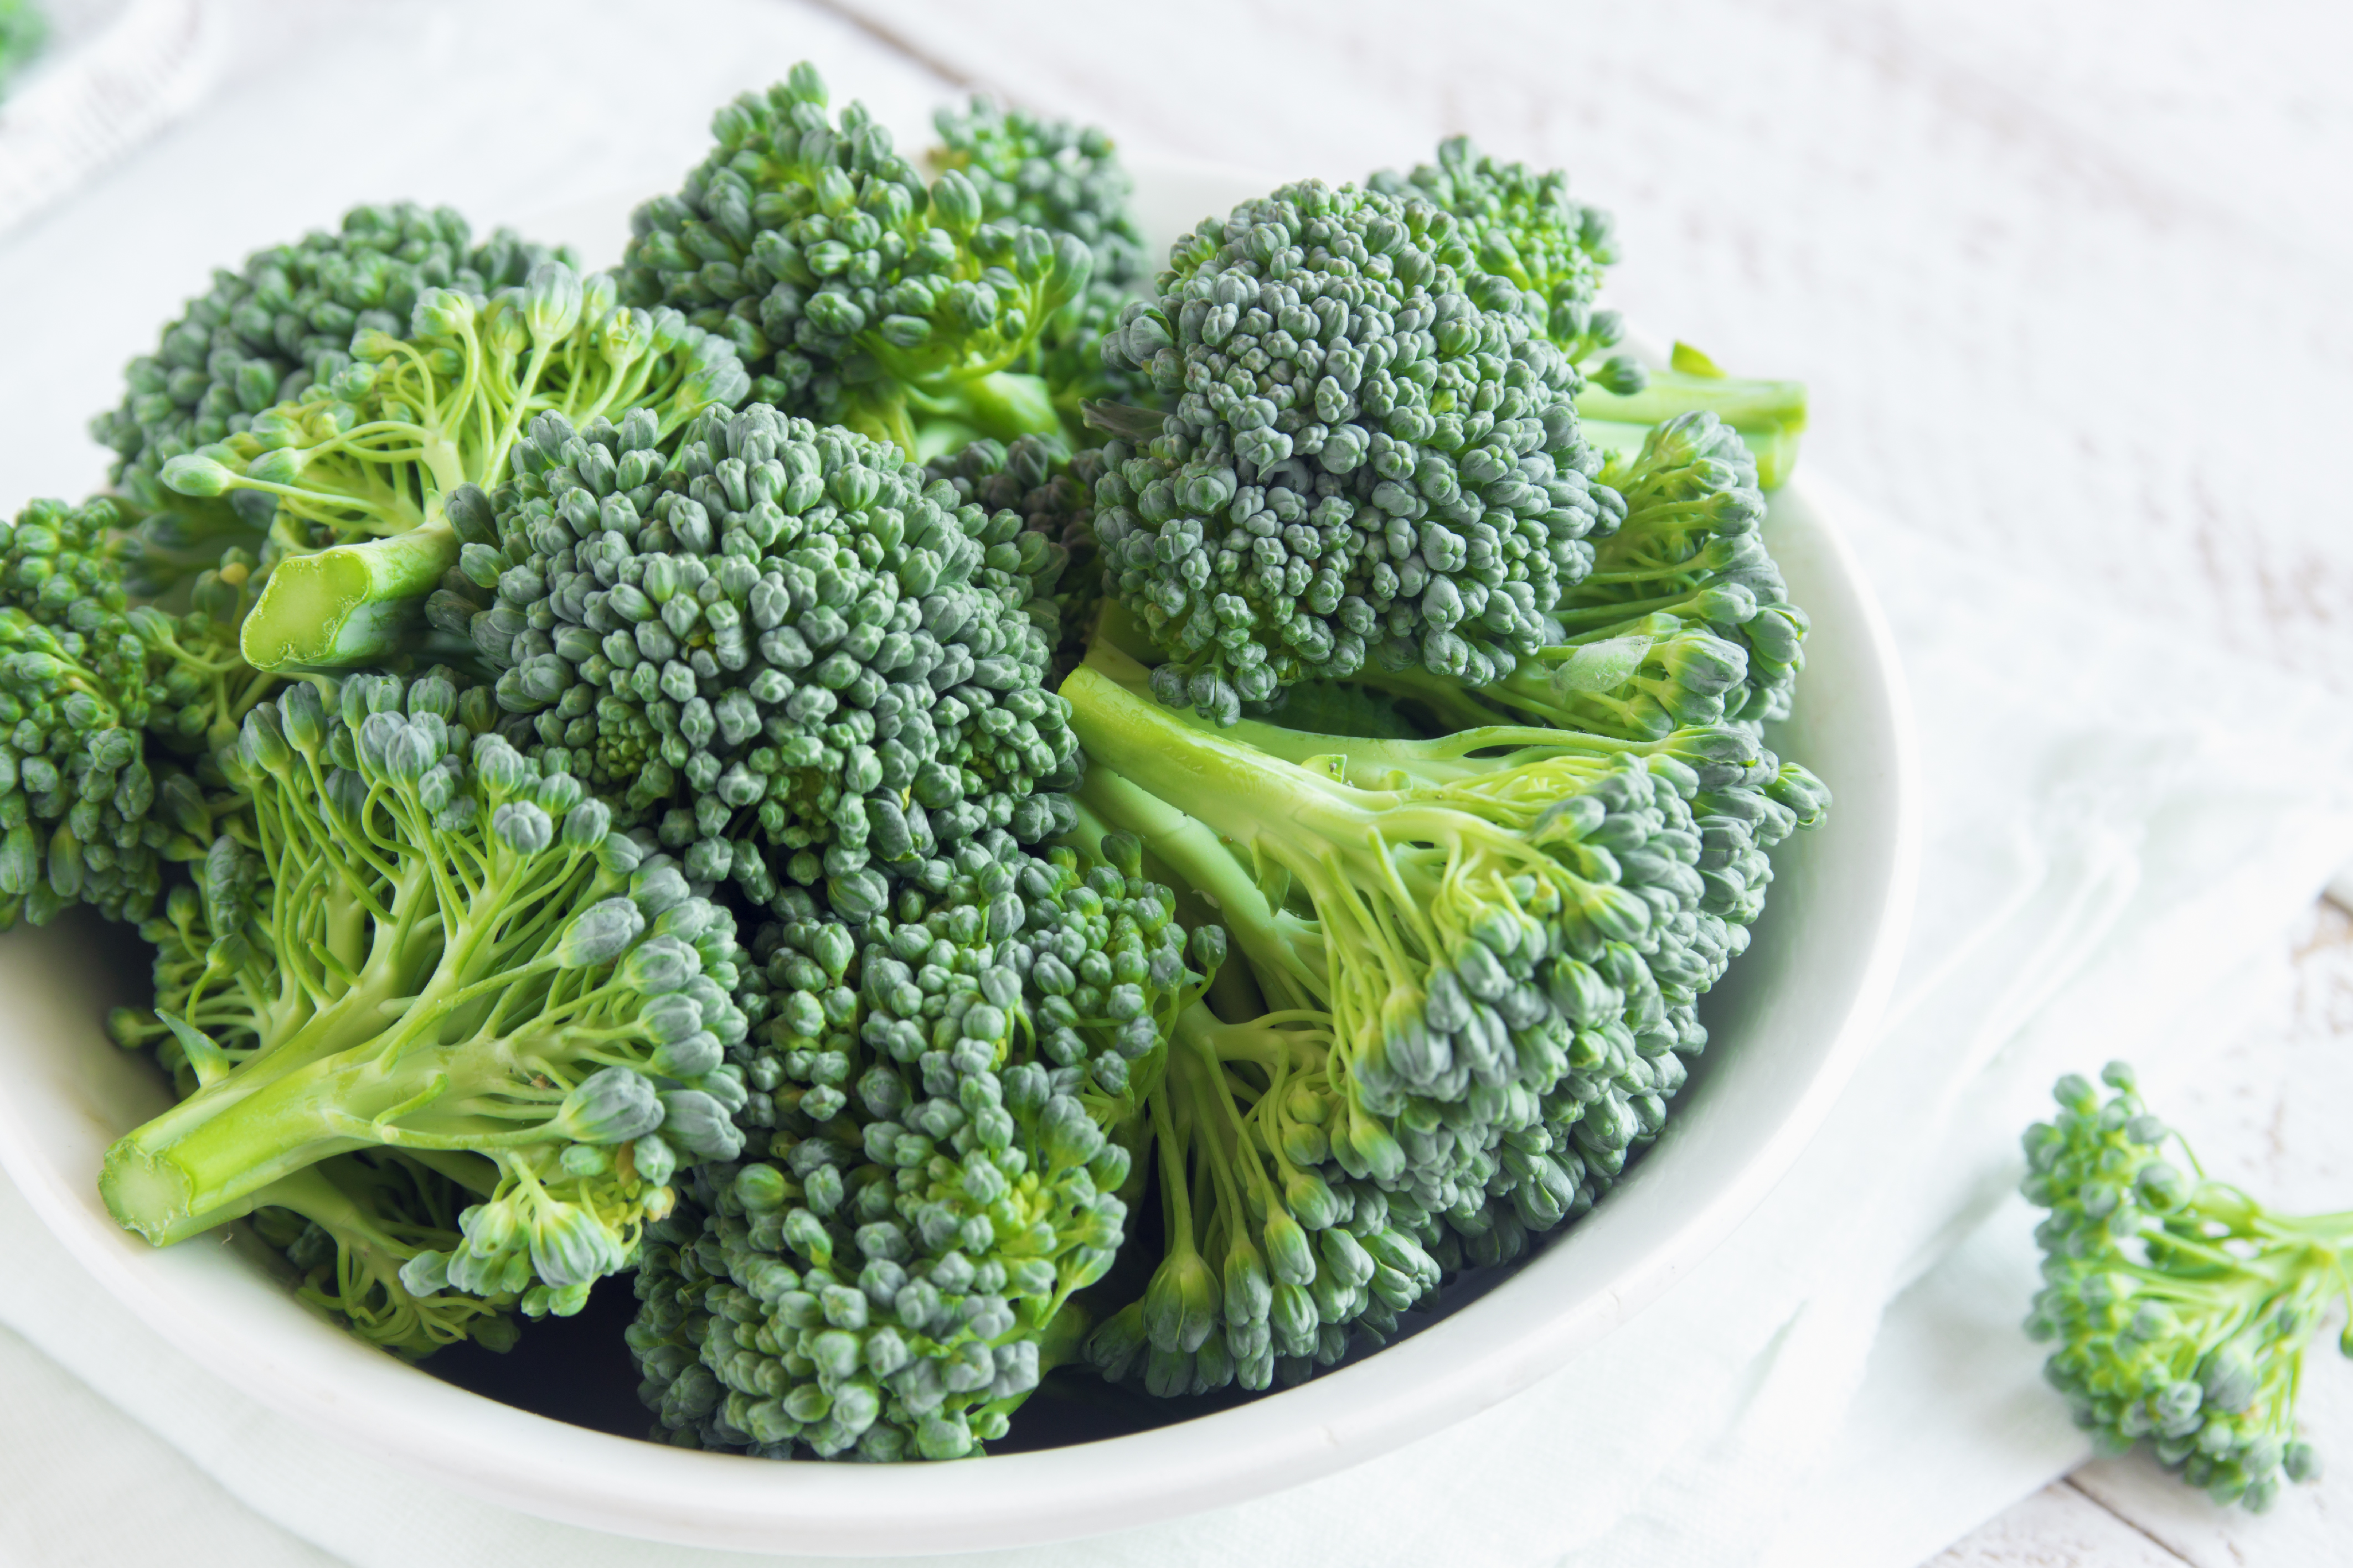 Cooking (Or Not Cooking) Broccoli To Protect Its Nutritional